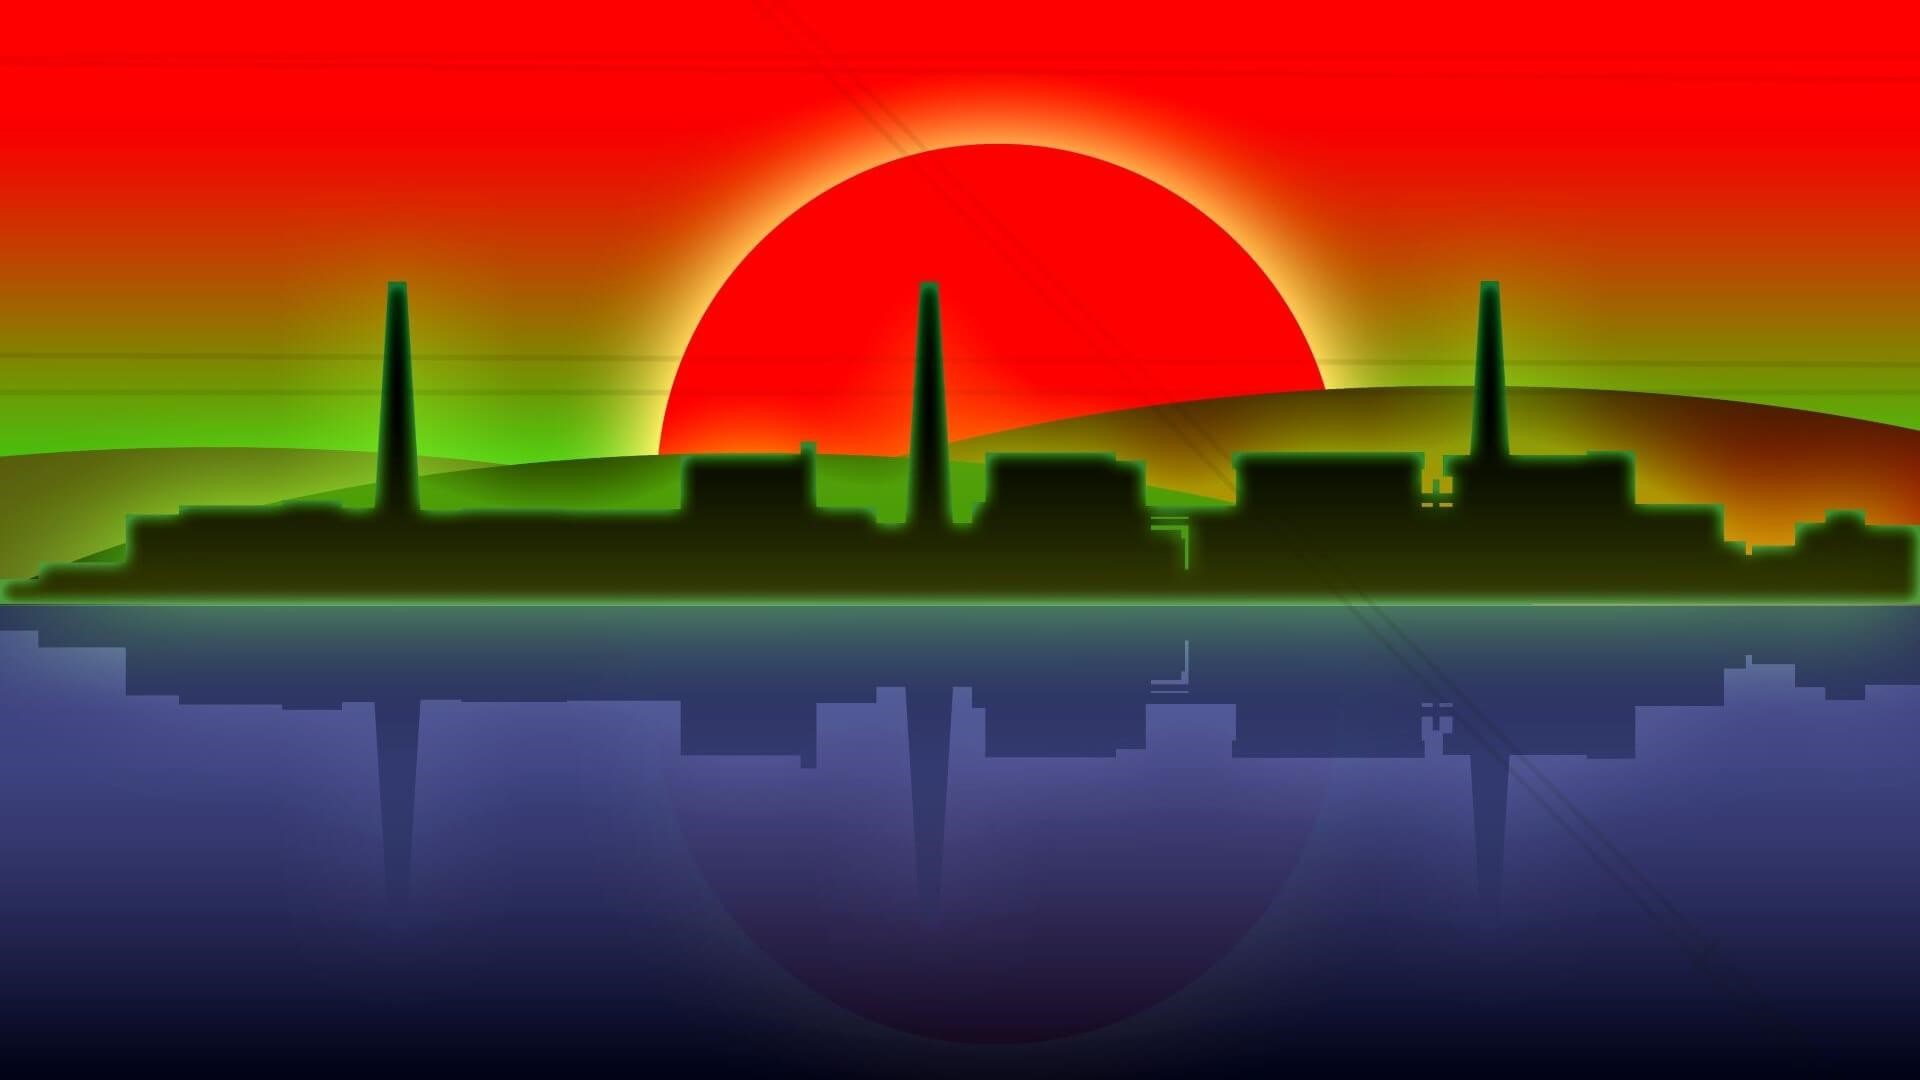 Artist's graphic of sun setting behind a power station